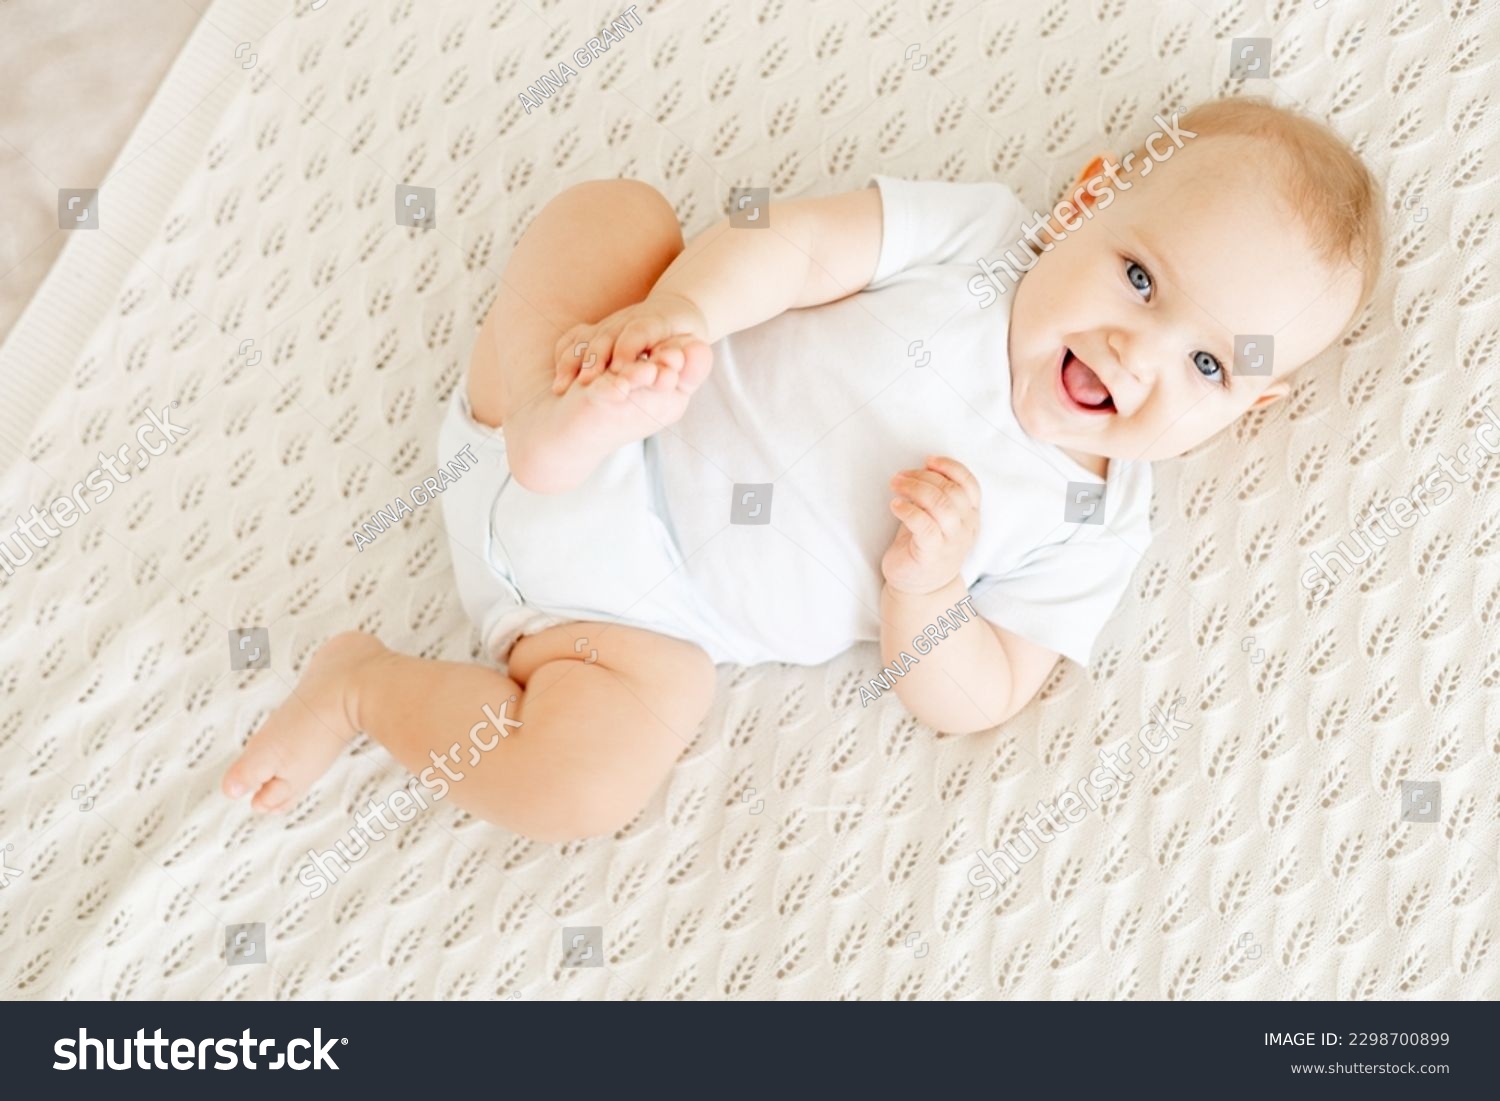 close-up of a laughing happy baby on a white cotton bed in a bright bedroom, a small smiling baby boy or girl lying on her back #2298700899